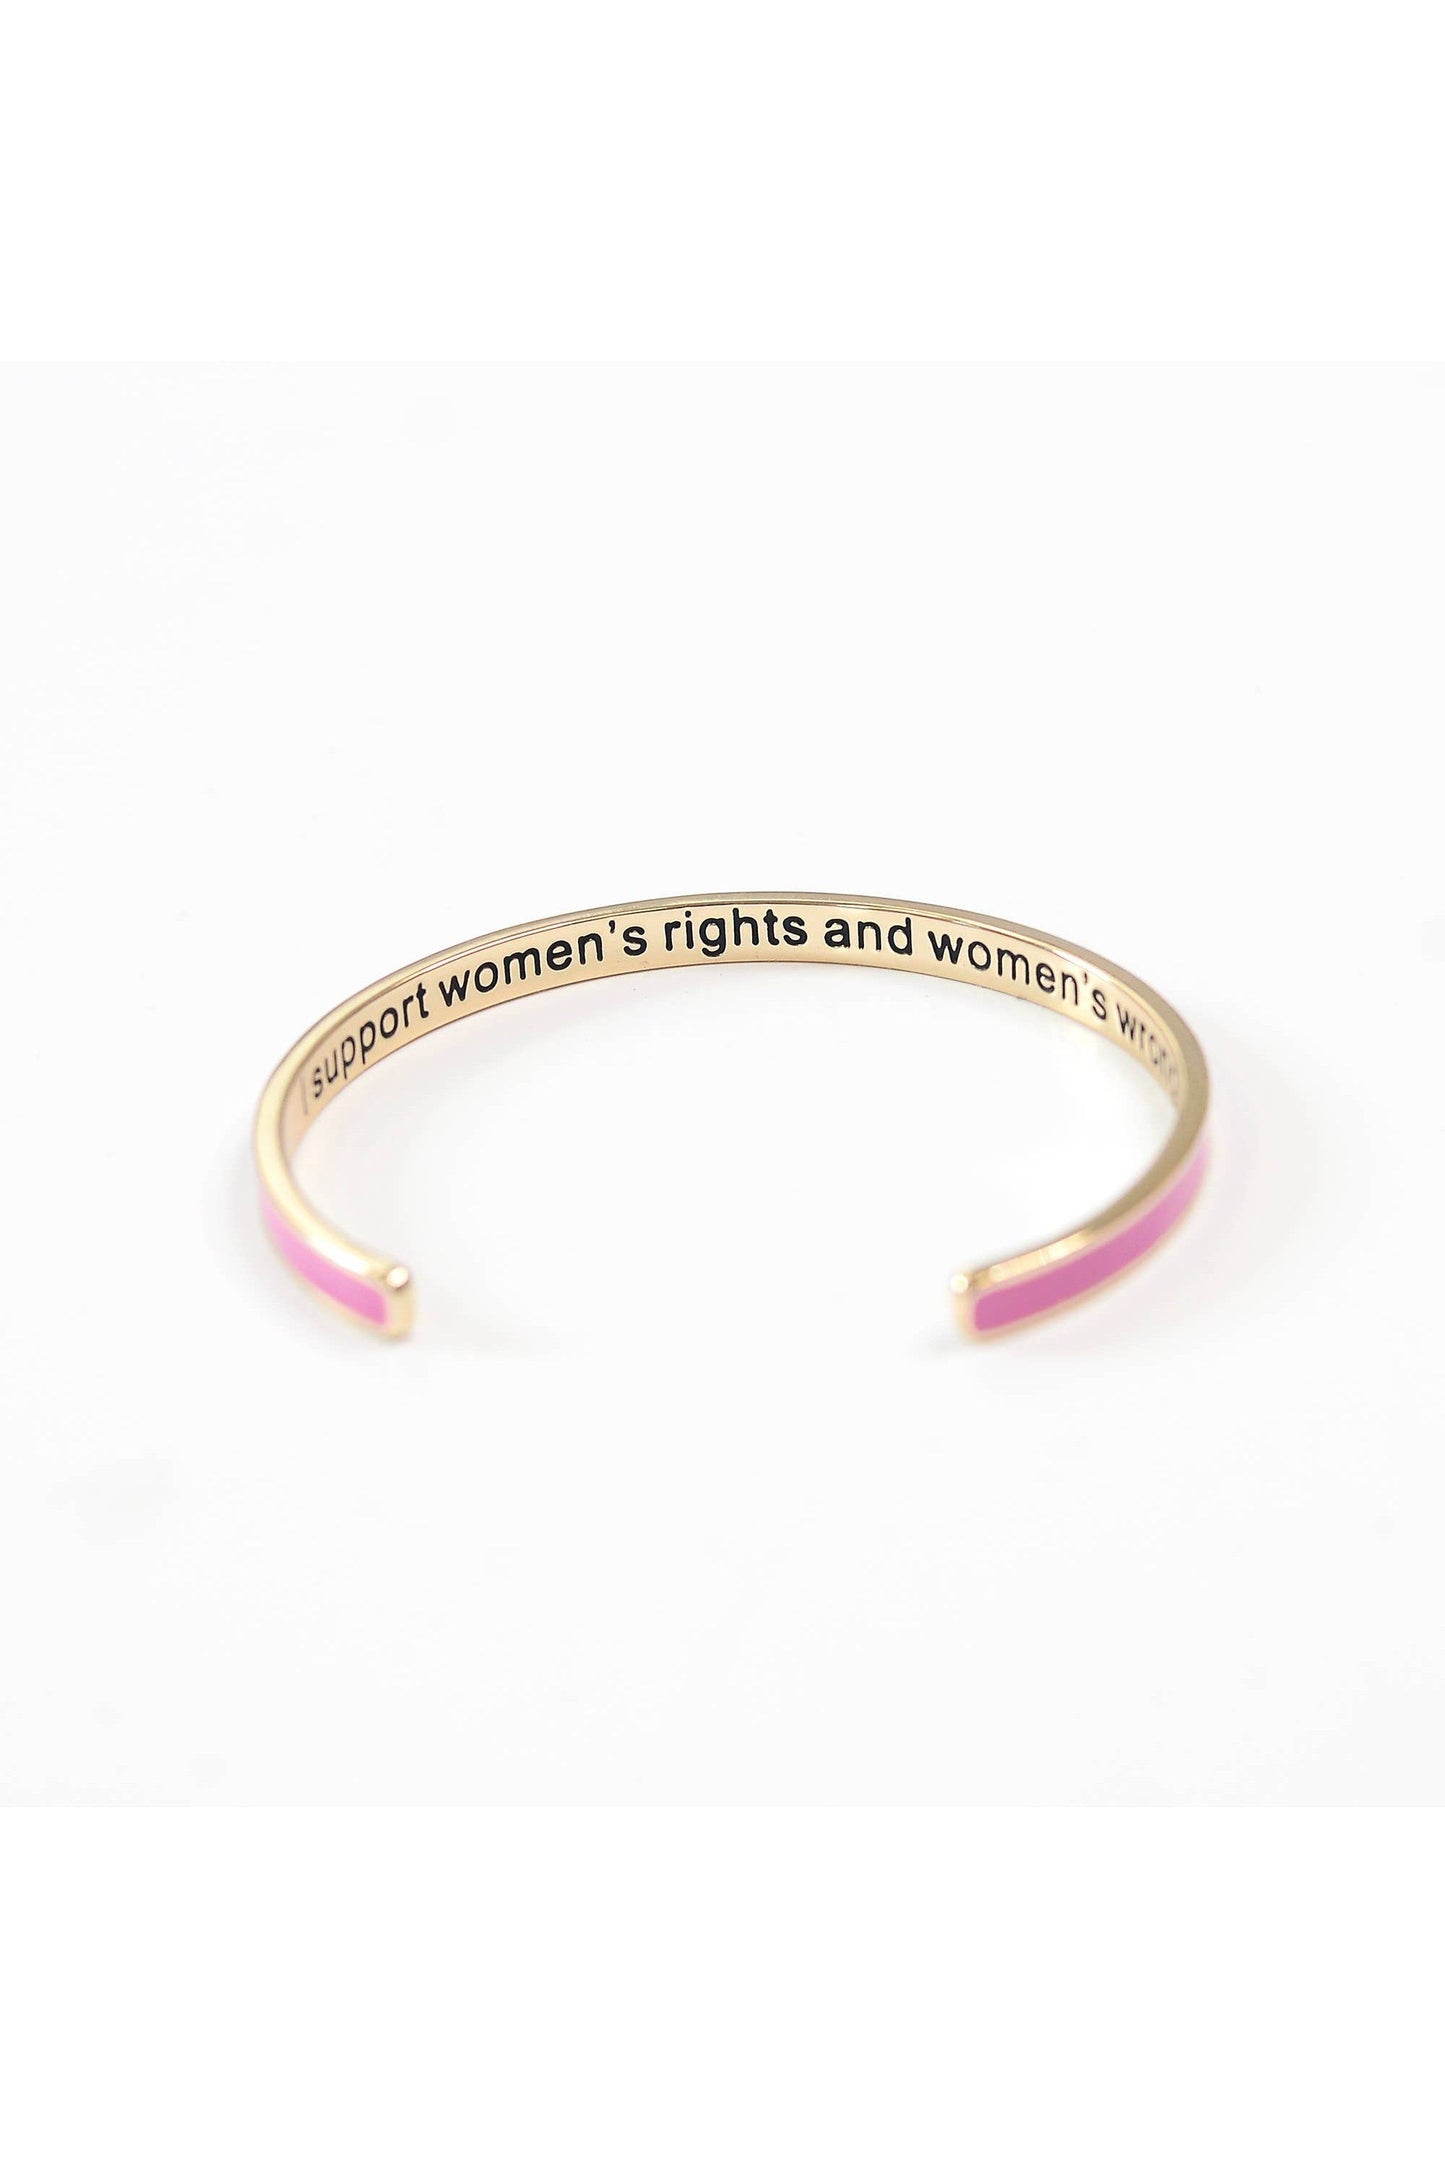 I Support Women's Rights and Wrongs Bangle Bracelet-Jewelry-Mugsby-Revive Boutique